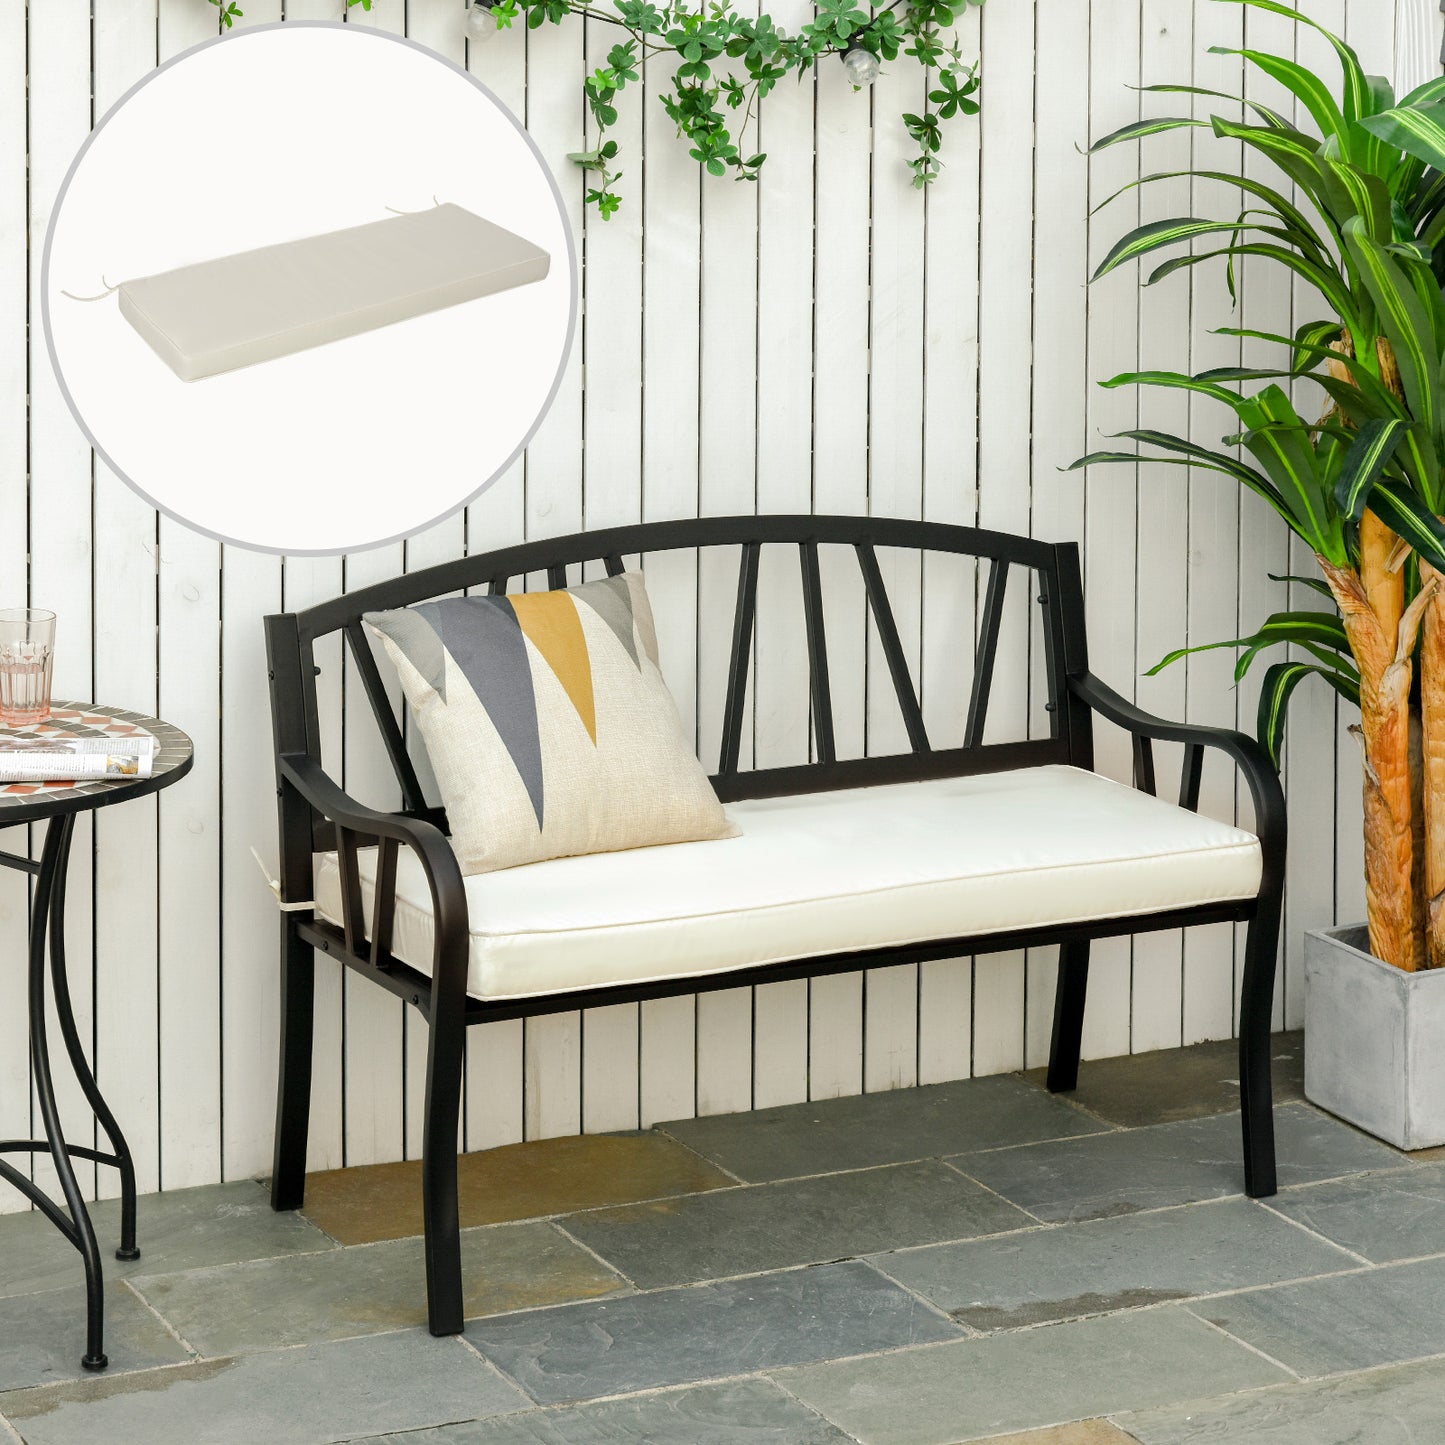 Outsunny Loveseat Bench Cushion: 2-Seater Pad for Swing Furniture, Versatile Indoor & Outdoor Use, Cream White